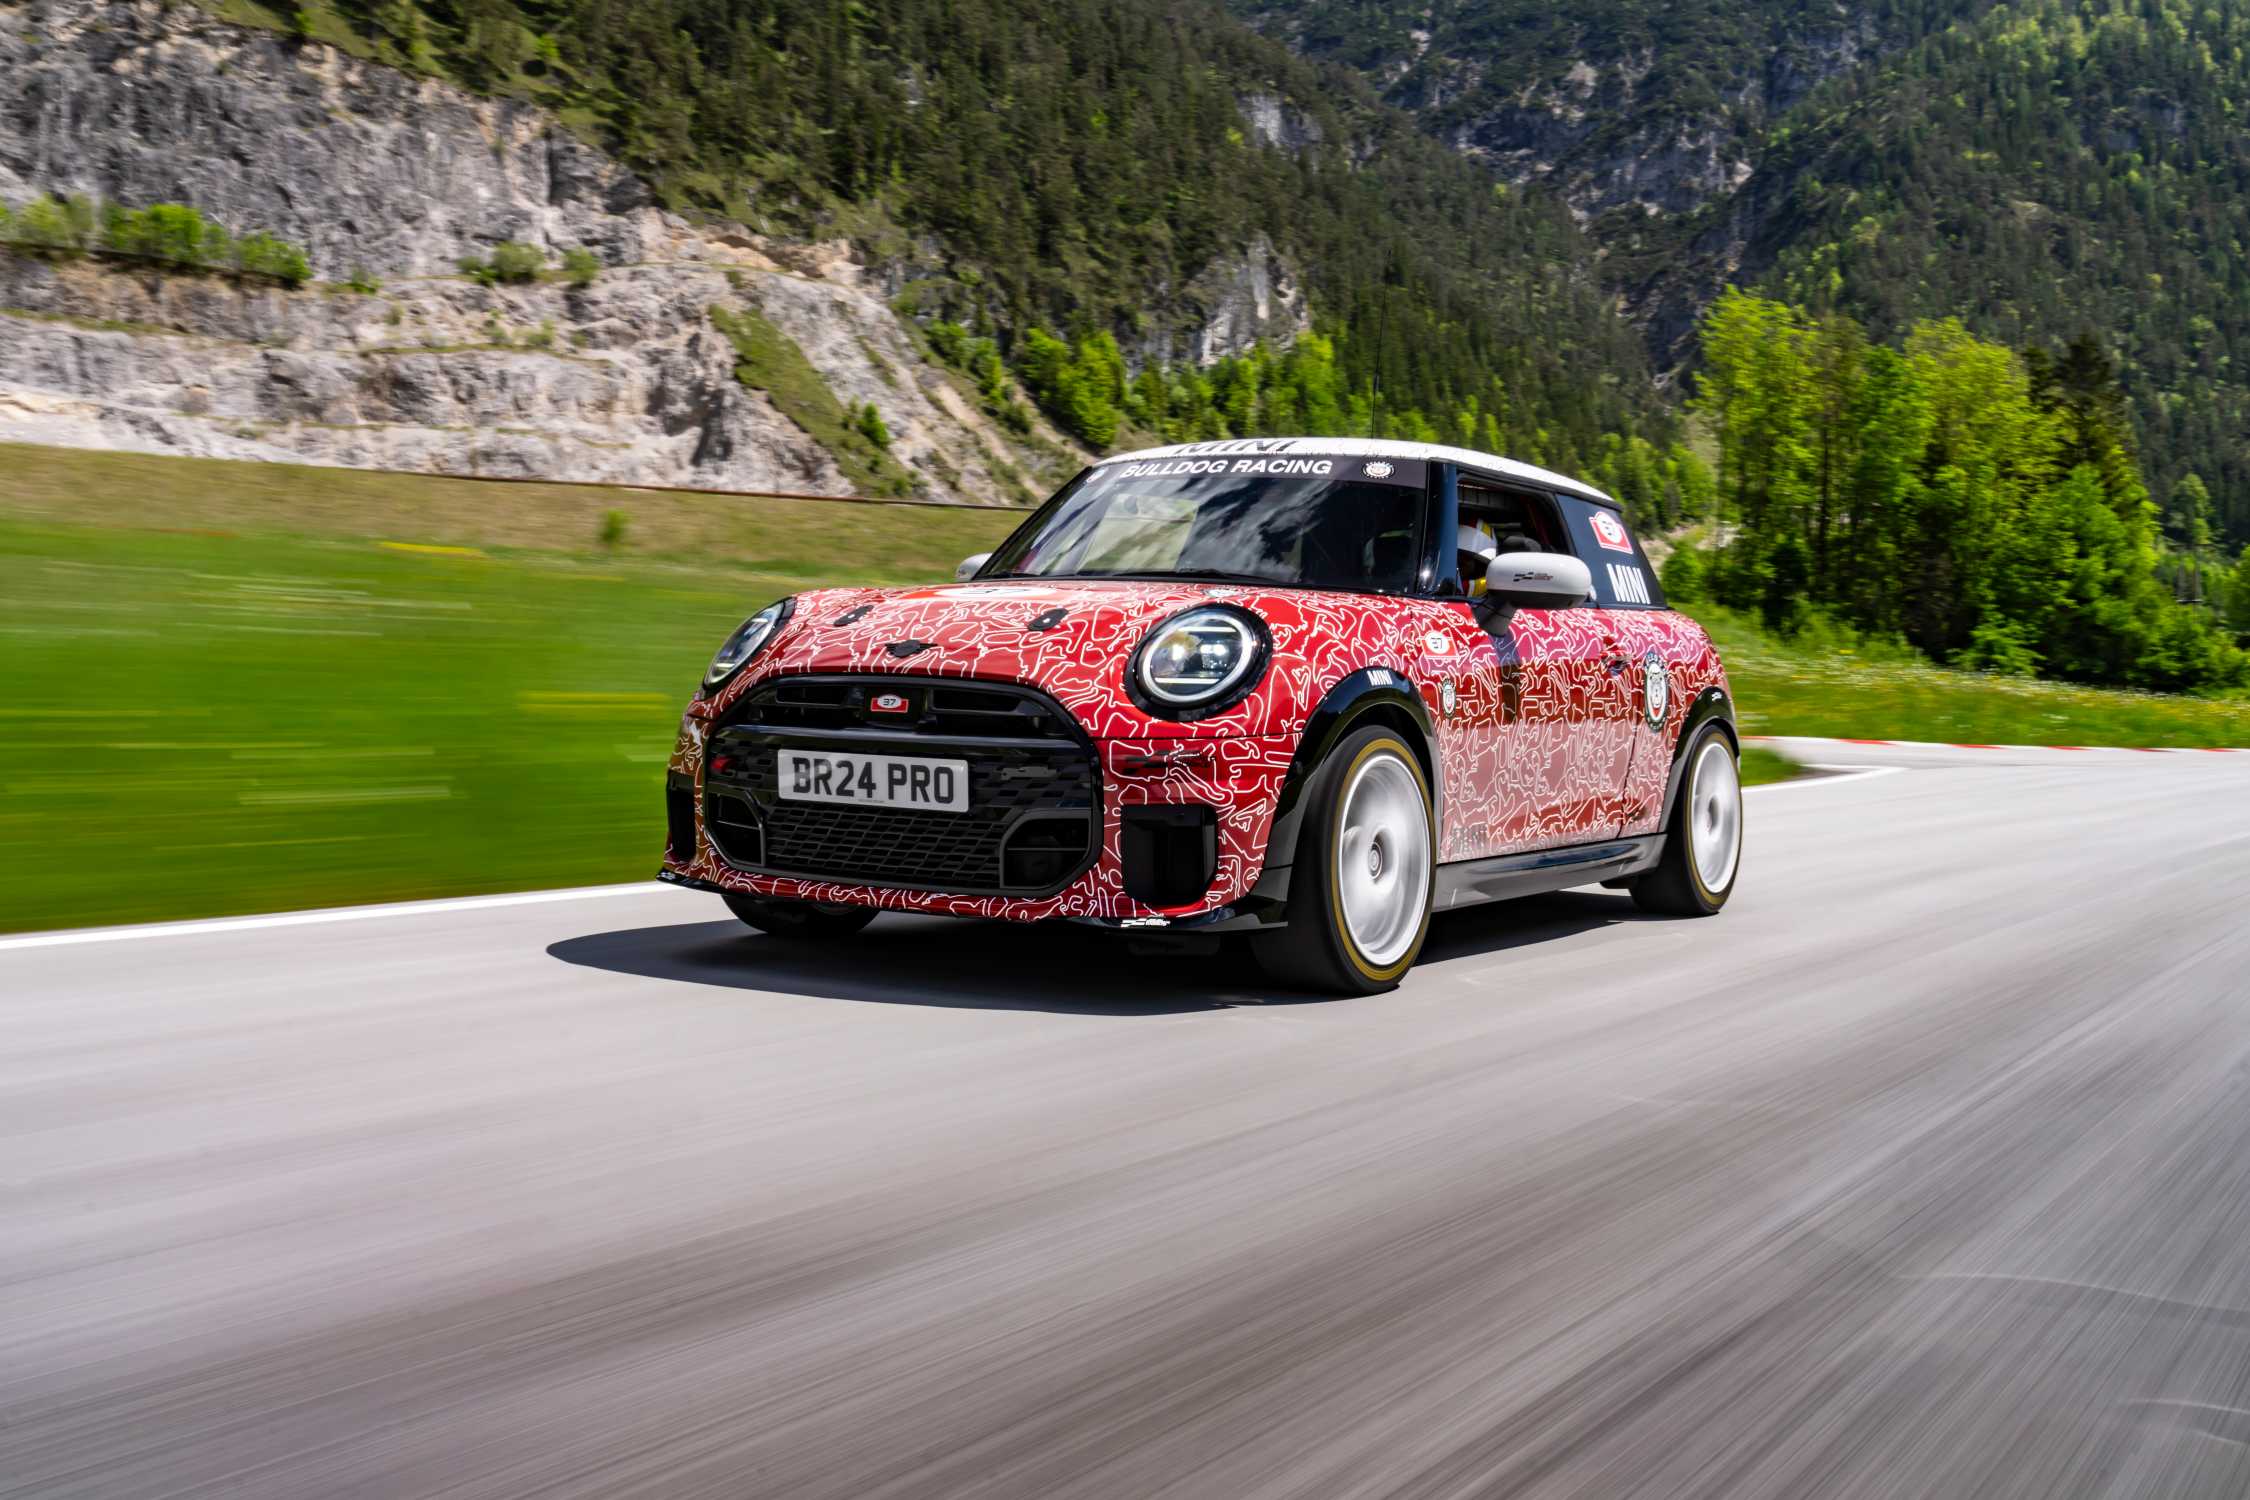 New MINI John Cooper Works to Debut at 24 Hours of Nürburgring Ahead of its World Premiere.